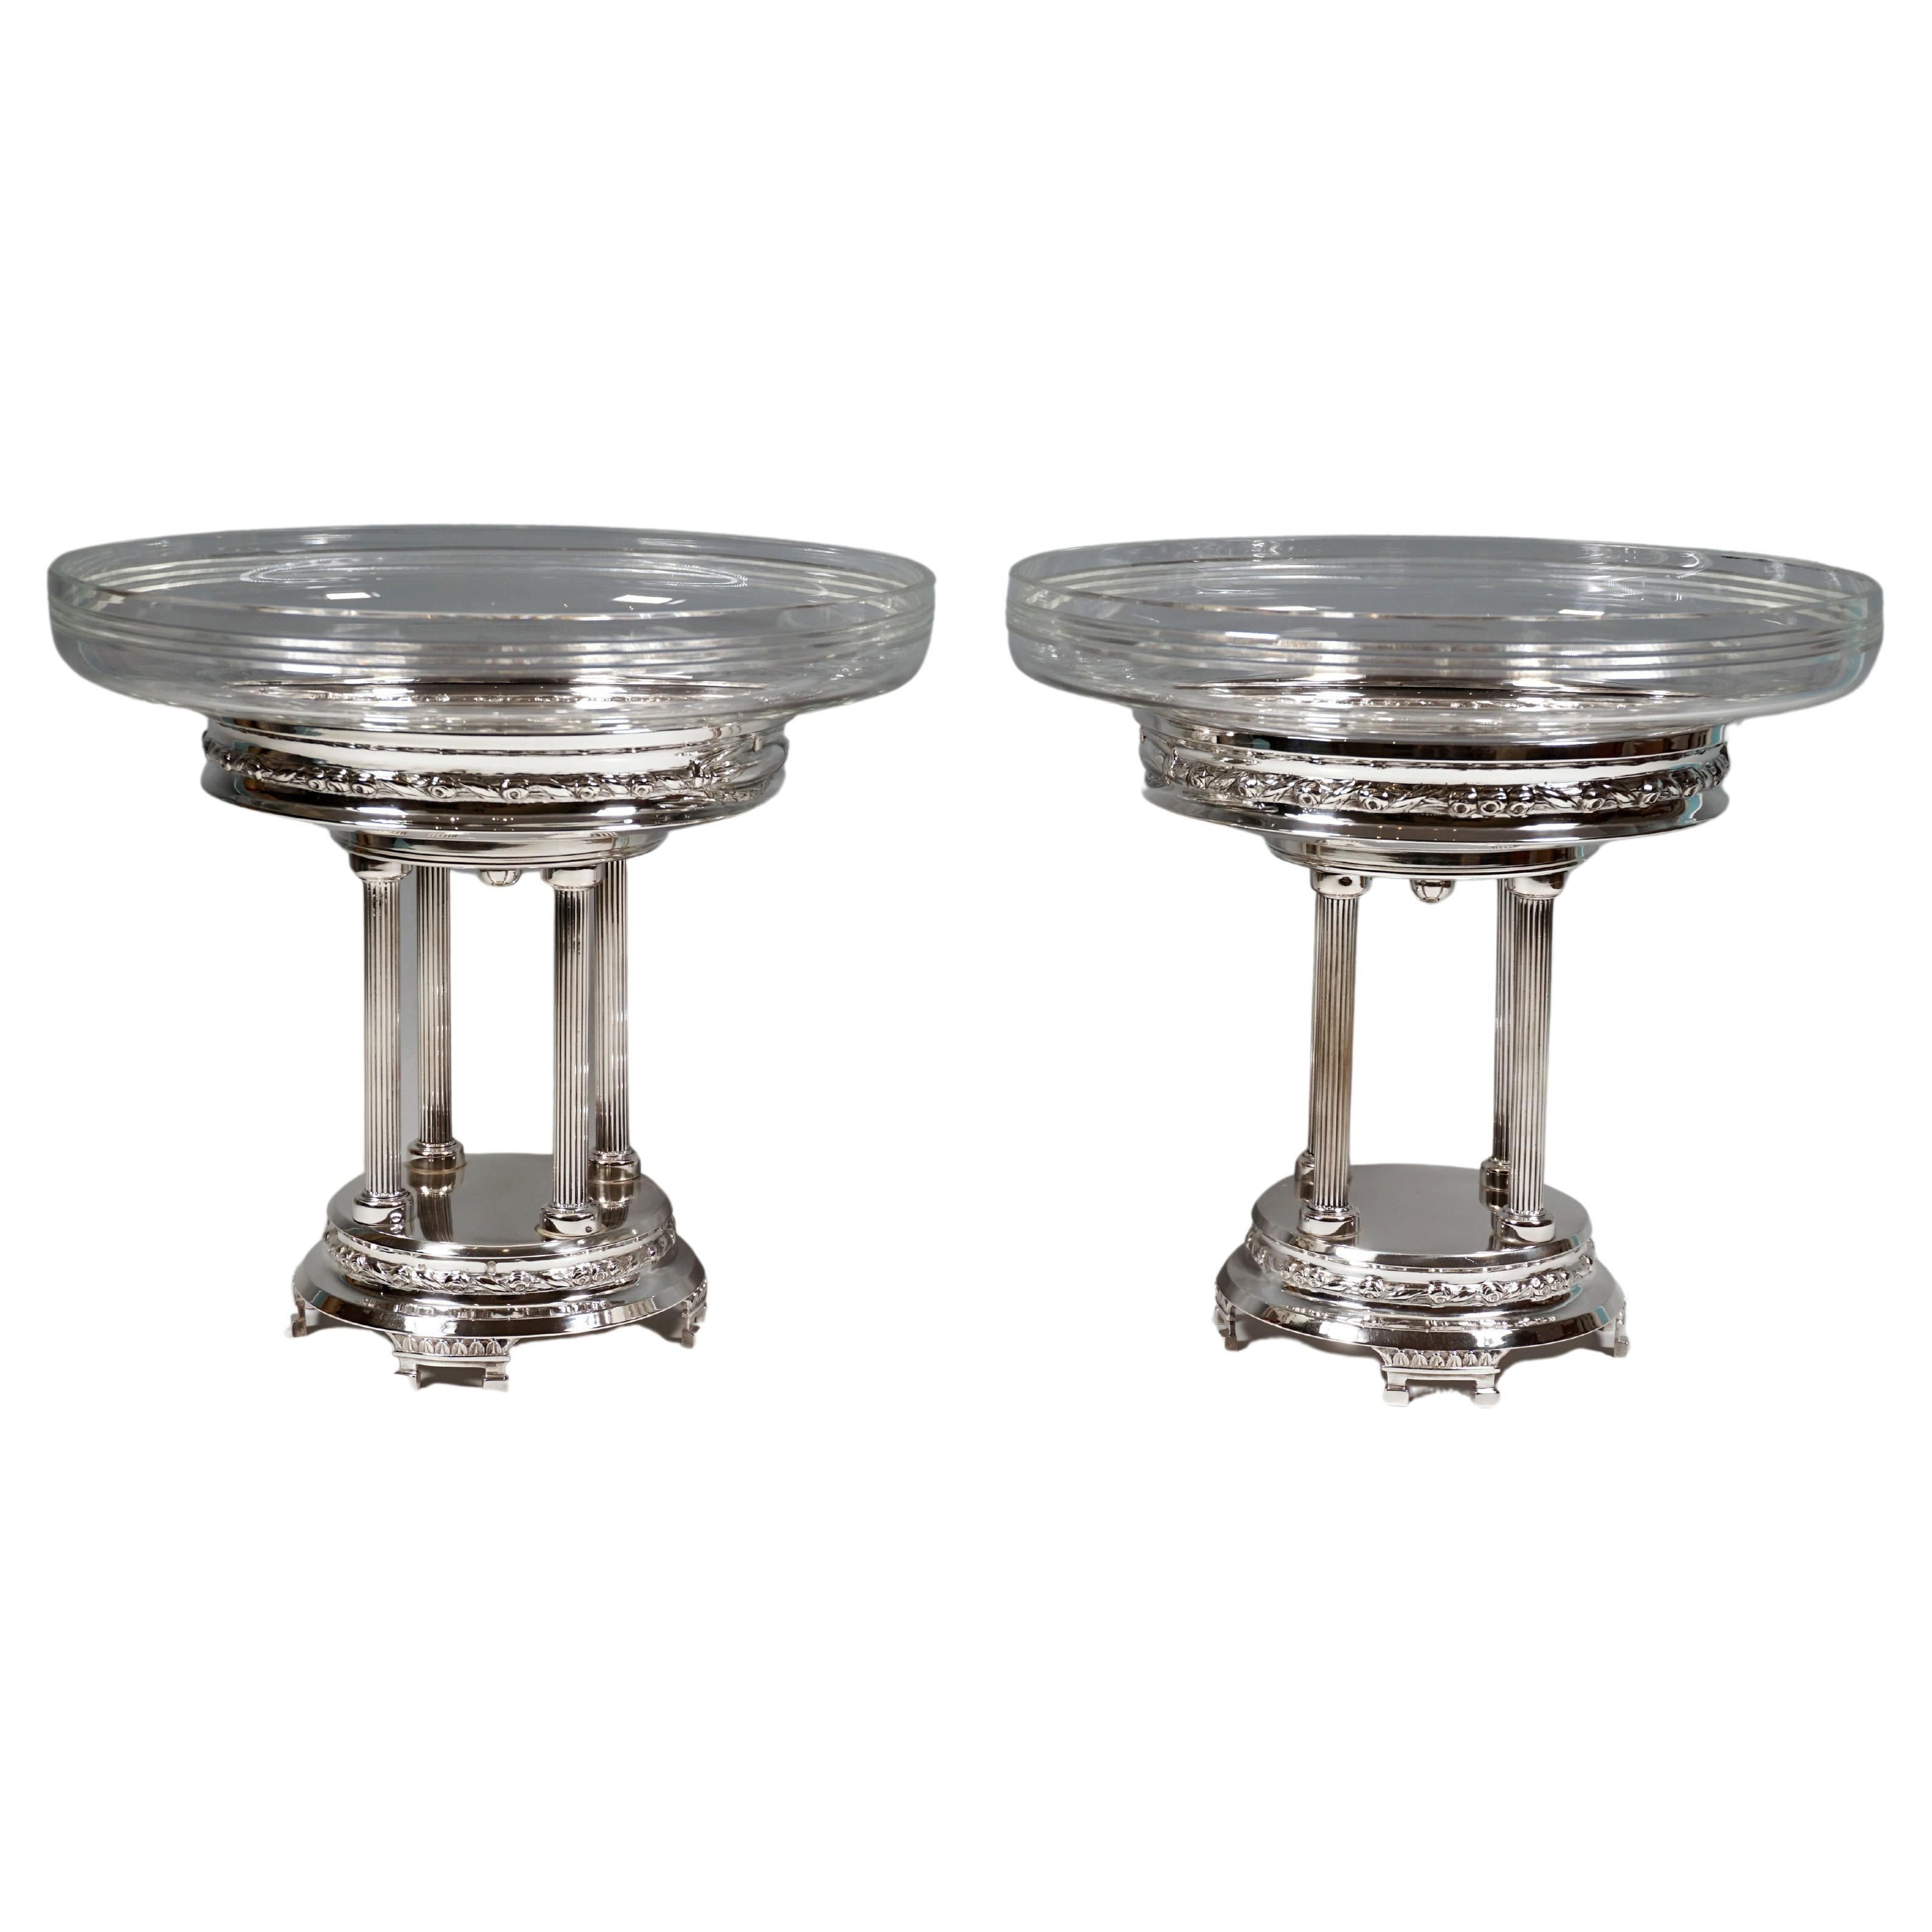 Pair Of Art Nouveau Silver Centerpieces With Glass Bowls, Vienna, Circa 1900 For Sale